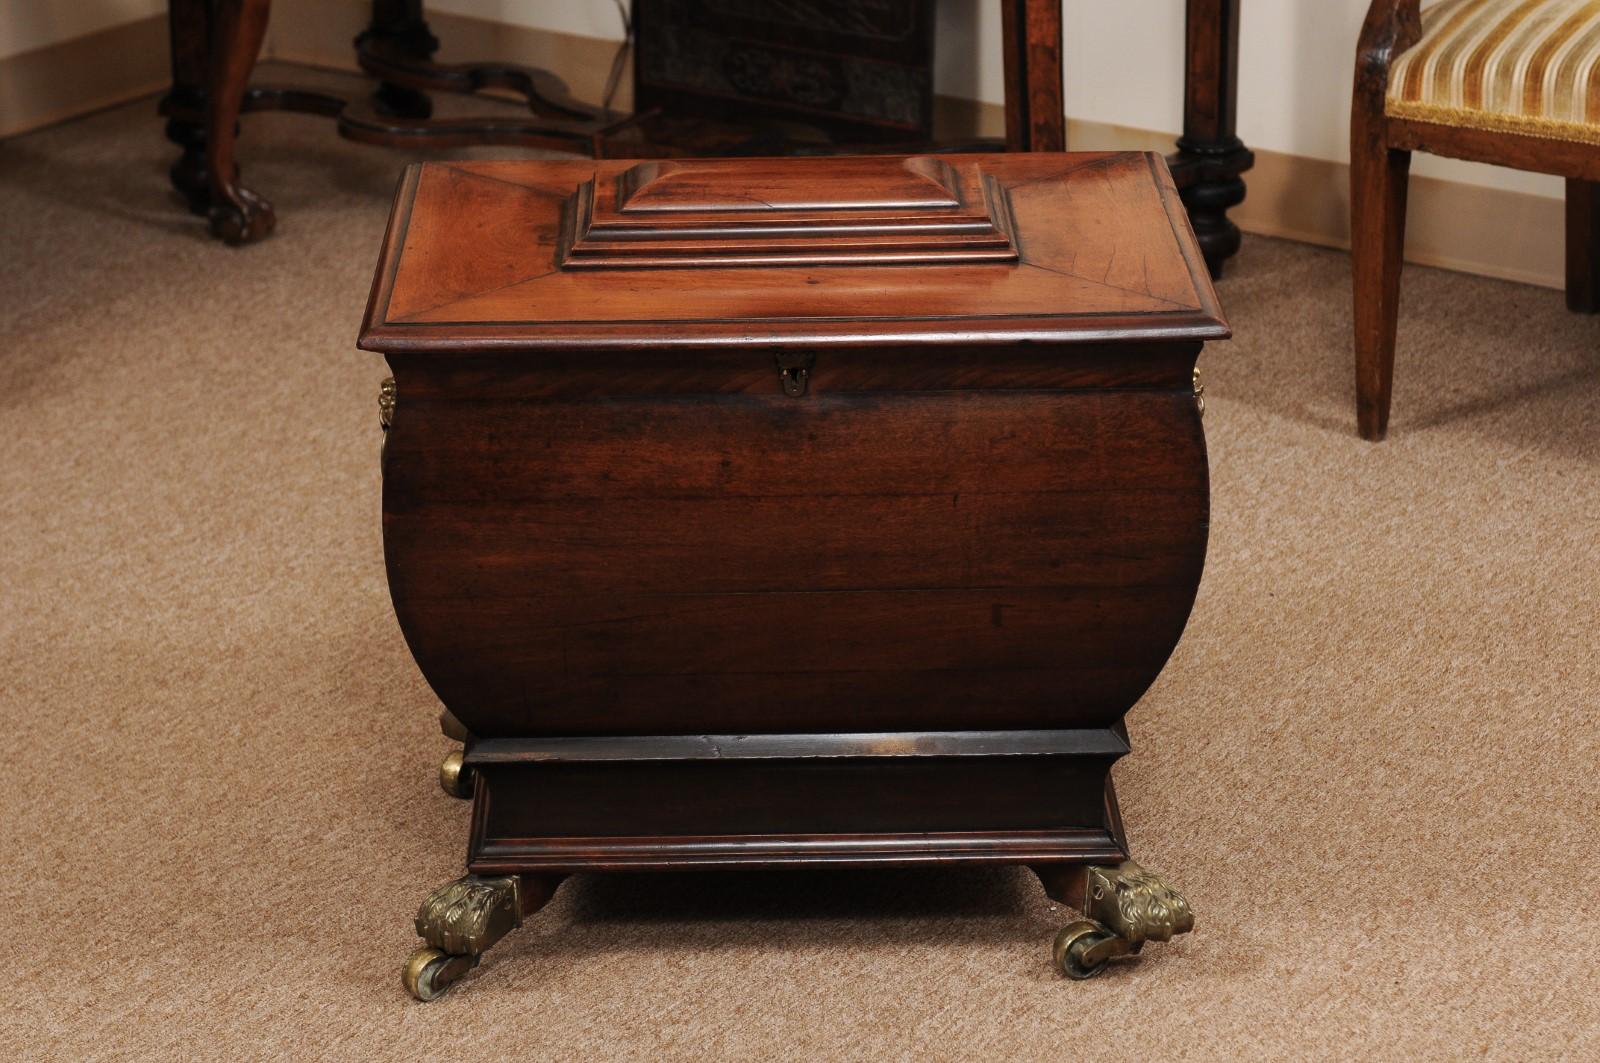 English Regency Mahogany Cellarette with Brass Paw Feet, Early 19th Century For Sale 3